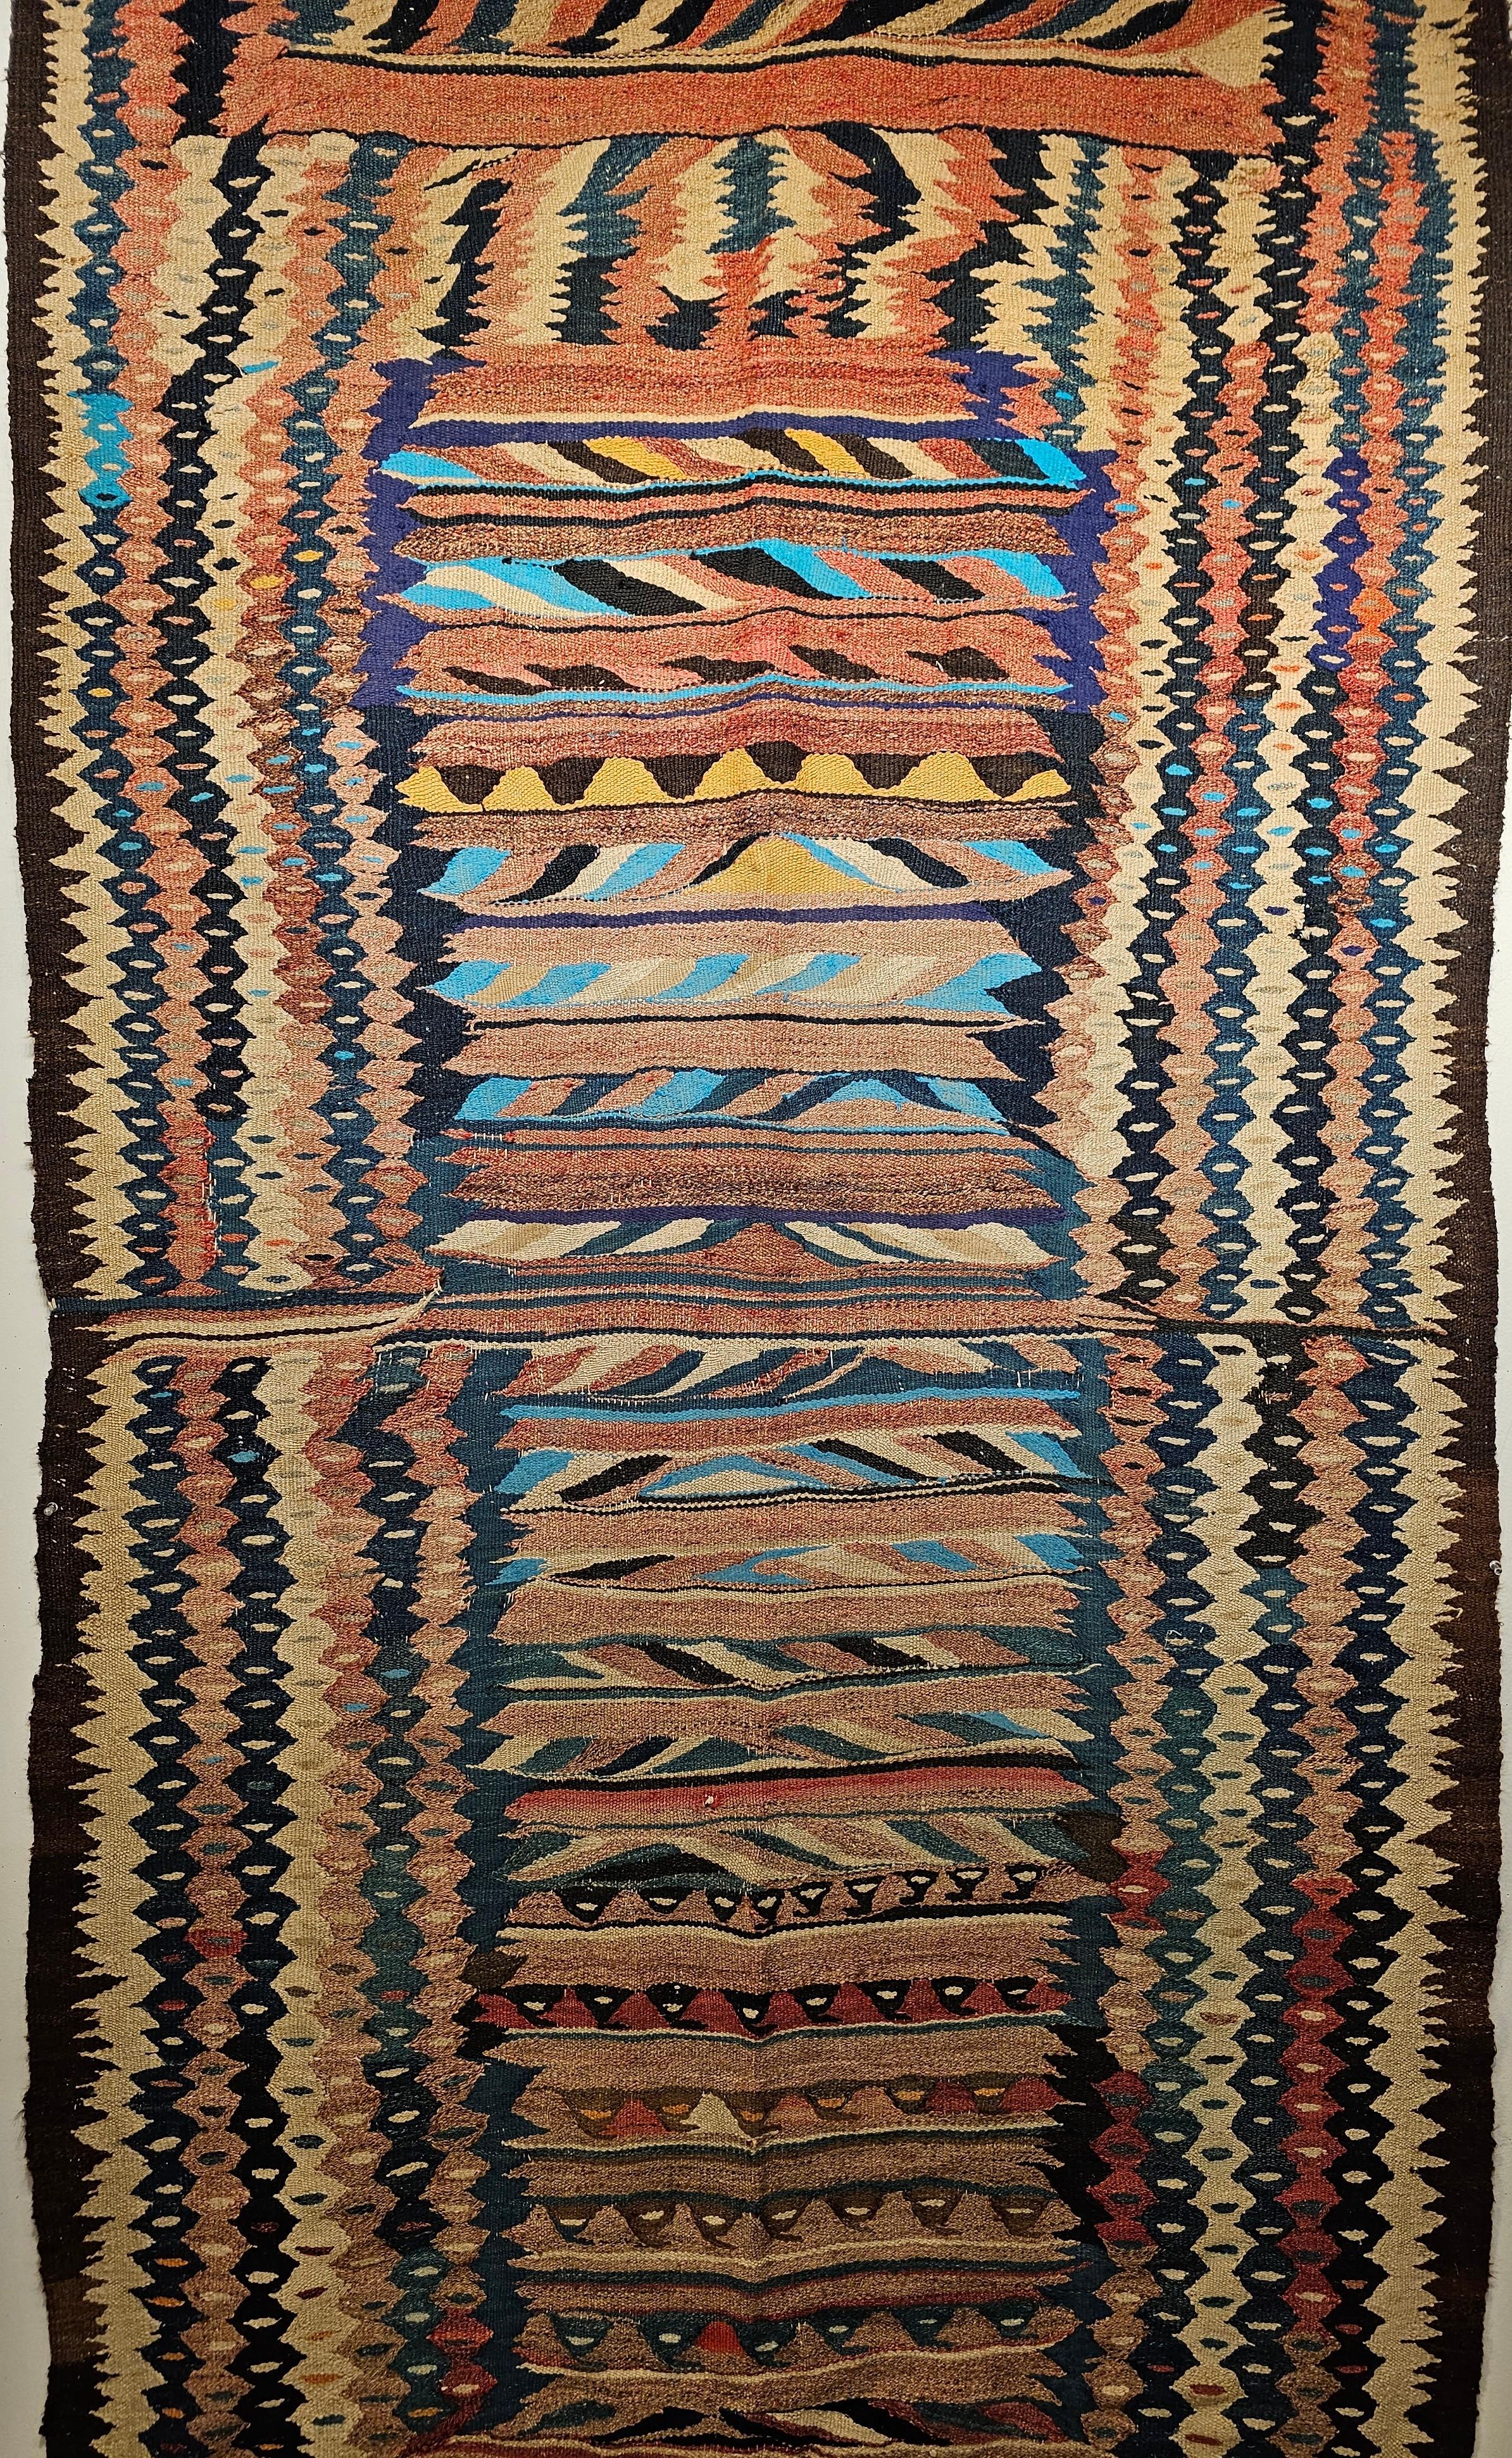 Vintage flat-woven Kurdish kilim with one of the most beautiful and “ultra-modern” designs in brilliant colors of turquoise, green, yellow, ivory, red, and brown from the early 1900s NW Persia.  It is difficult to imagine how the creators of such a